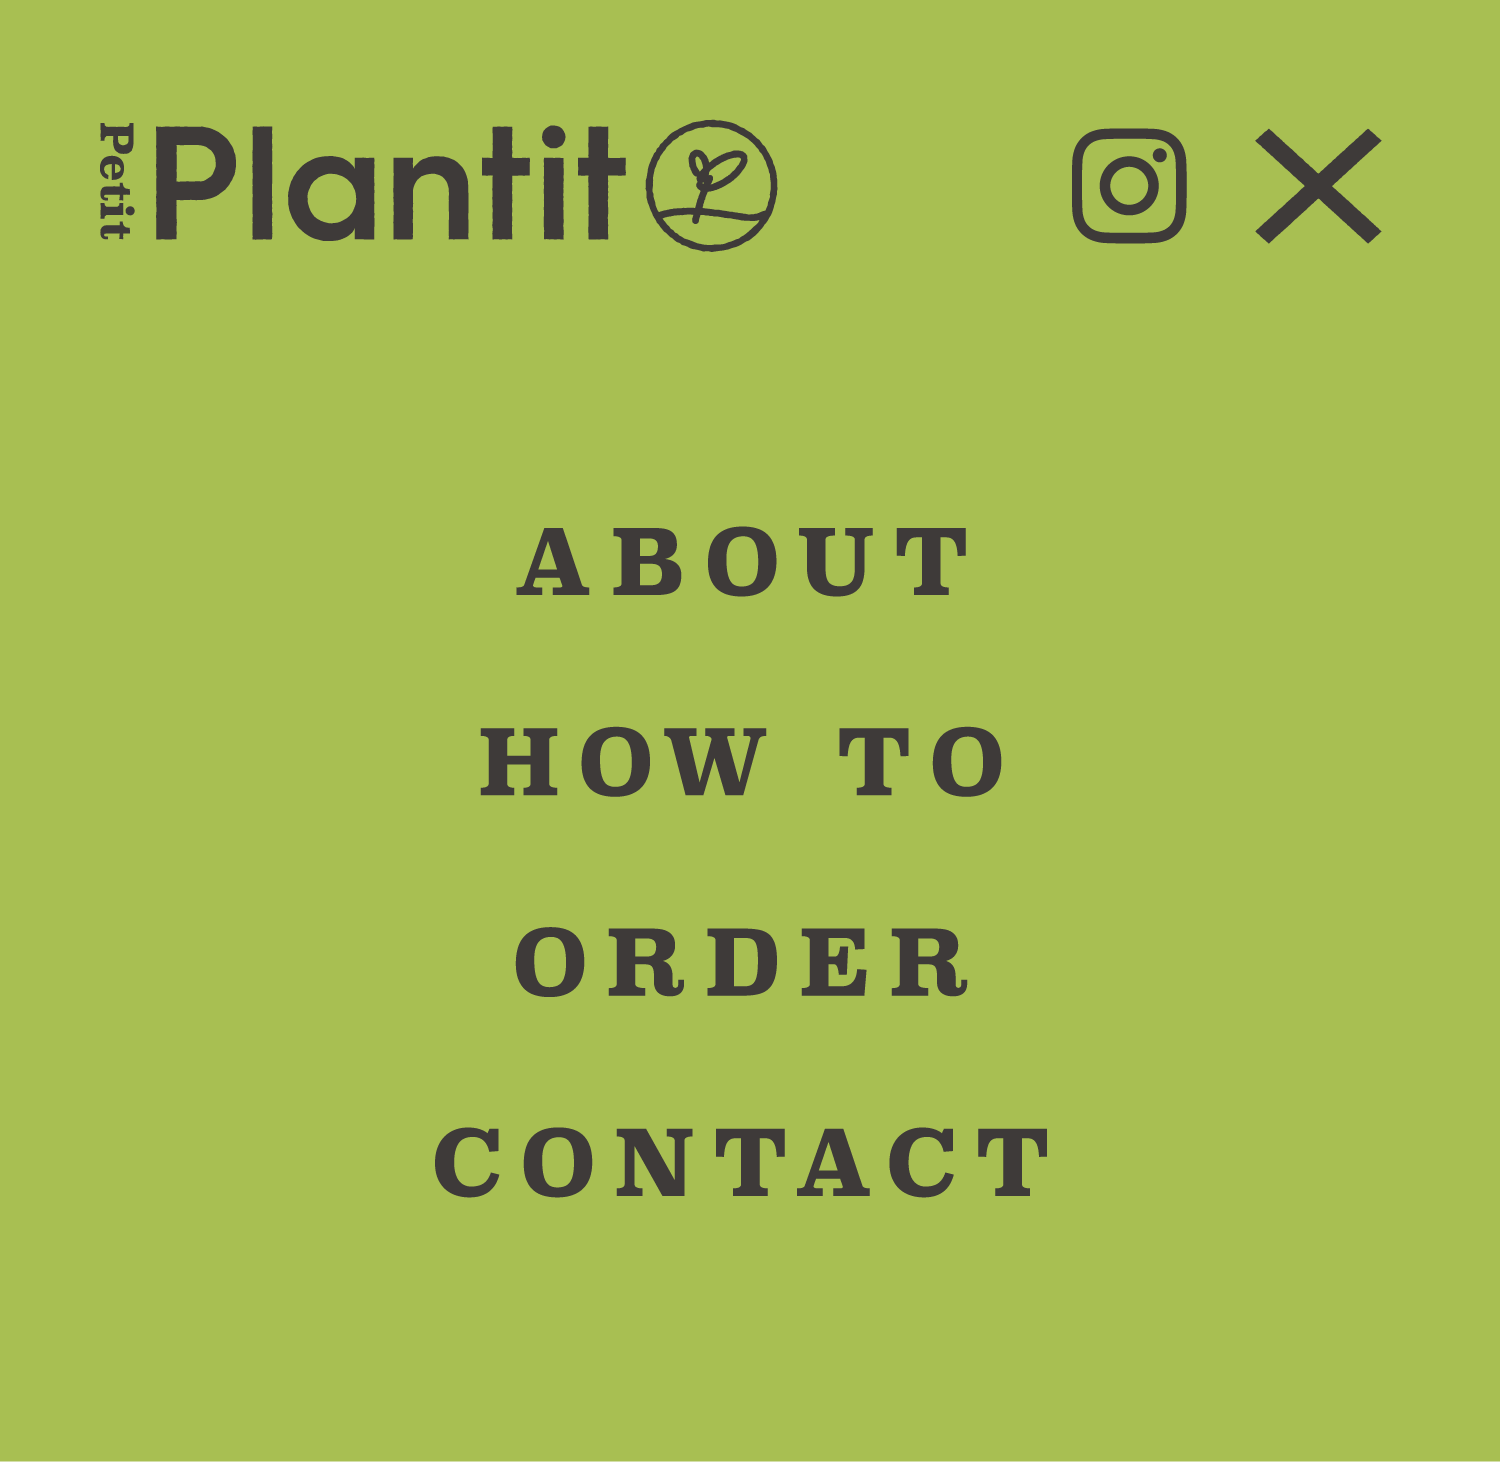 ABOUT HOW TO ORDER CONTACT